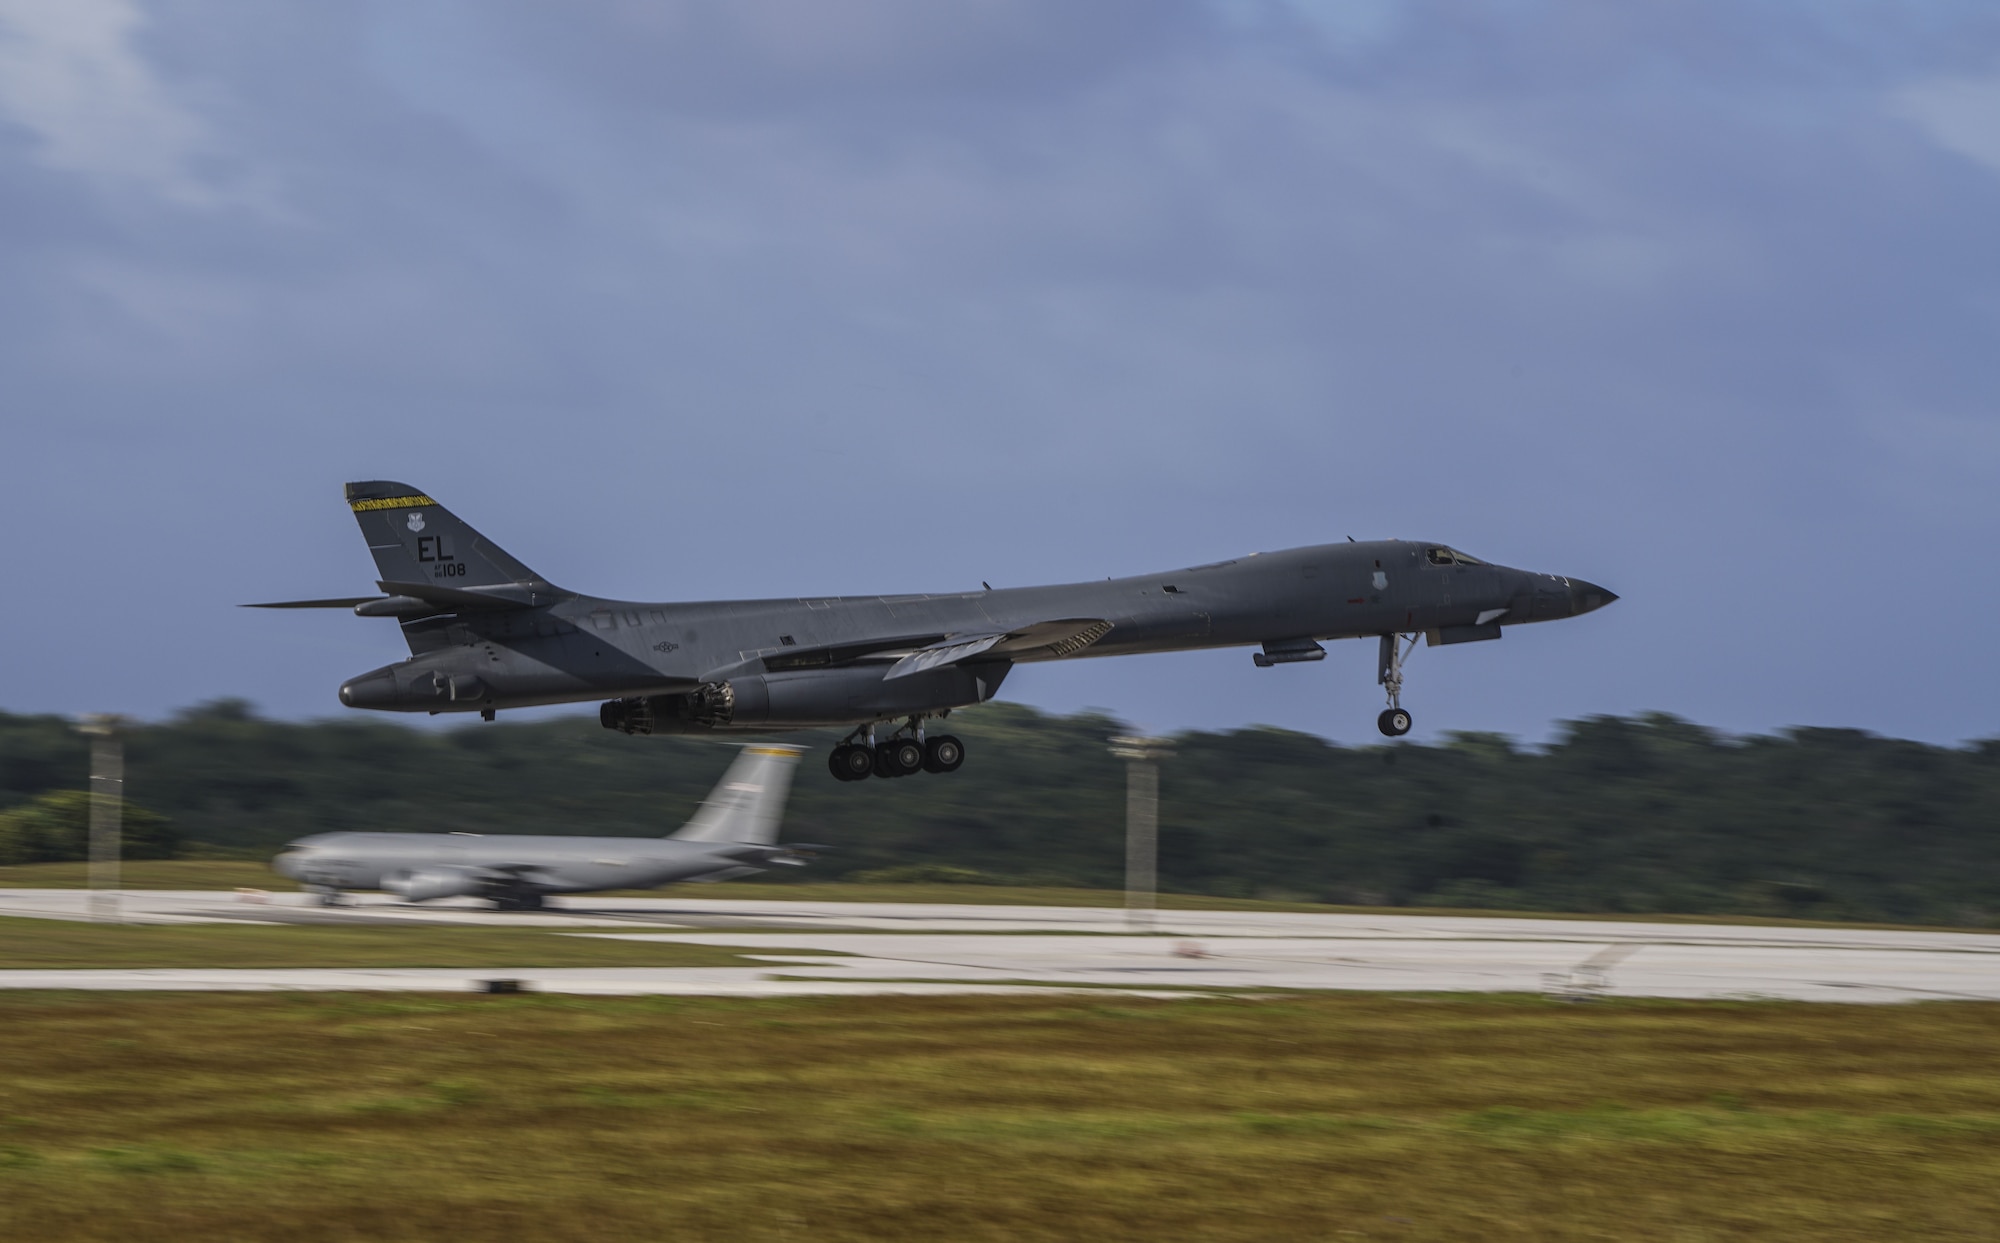 A U.S. Air Force B-1B Lancer, assigned to the 37th Expeditionary Bomb Squadron, deployed from Ellsworth Air Force Base (AFB), South Dakota, lands at Andersen AFB, Guam, Dec. 4, 2017.